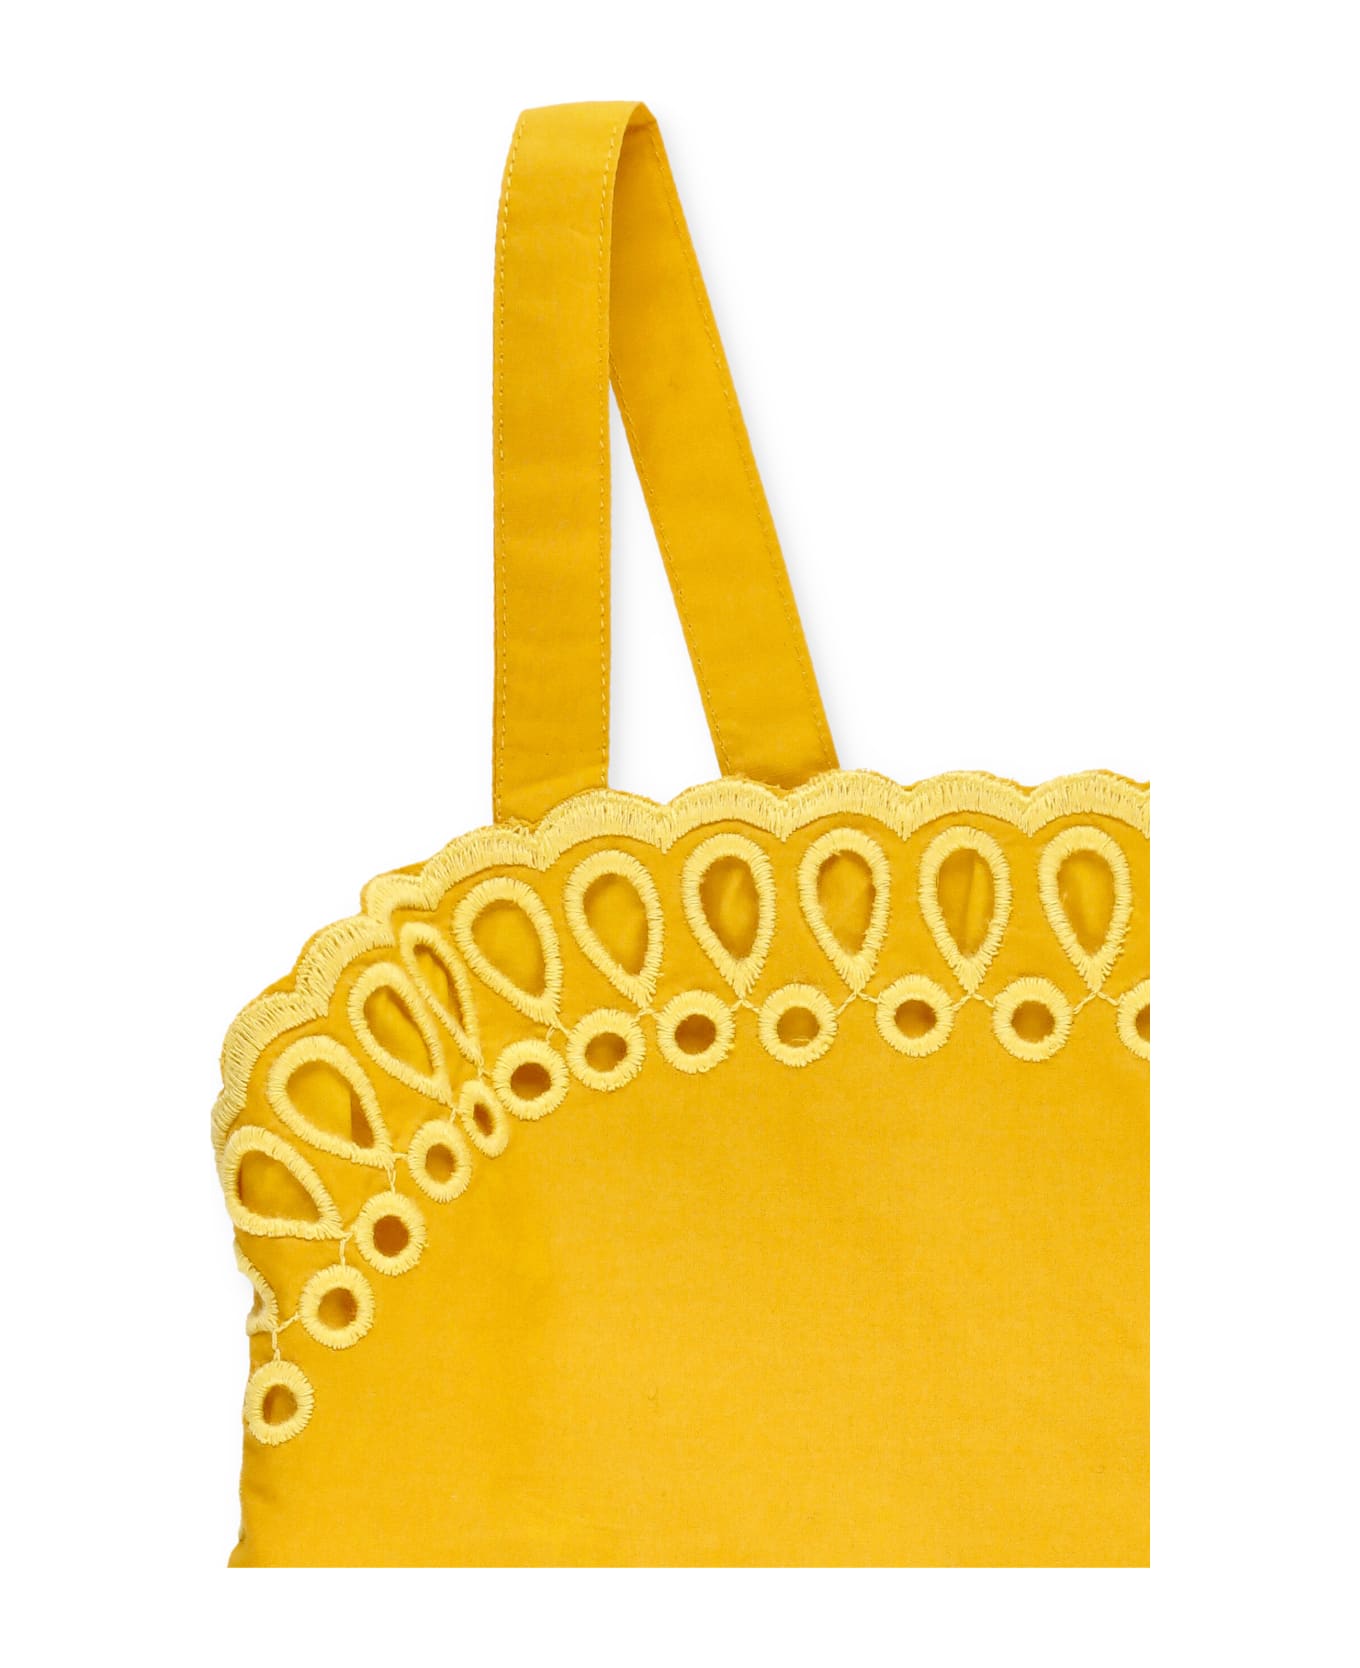 Stella McCartney Forest With Sangallo Lace - Yellow